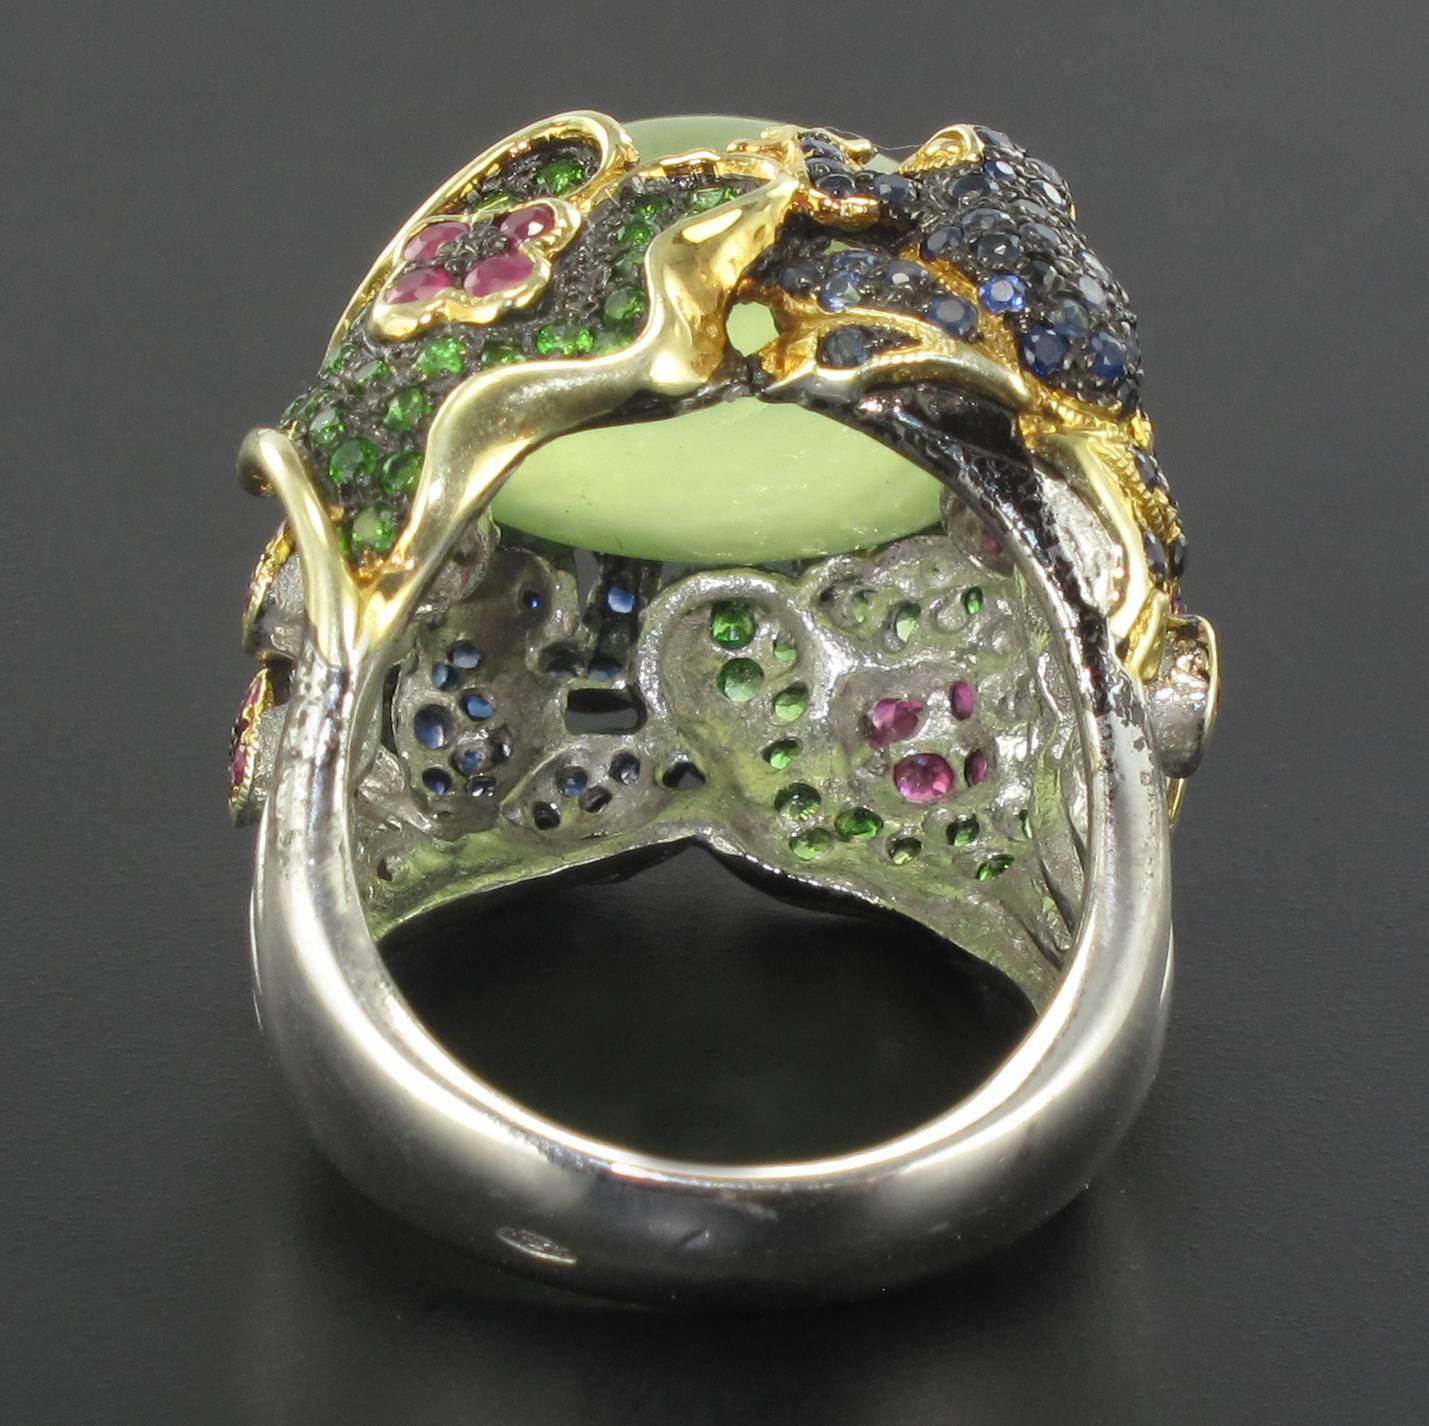 Water Lily and Frog Ring 1